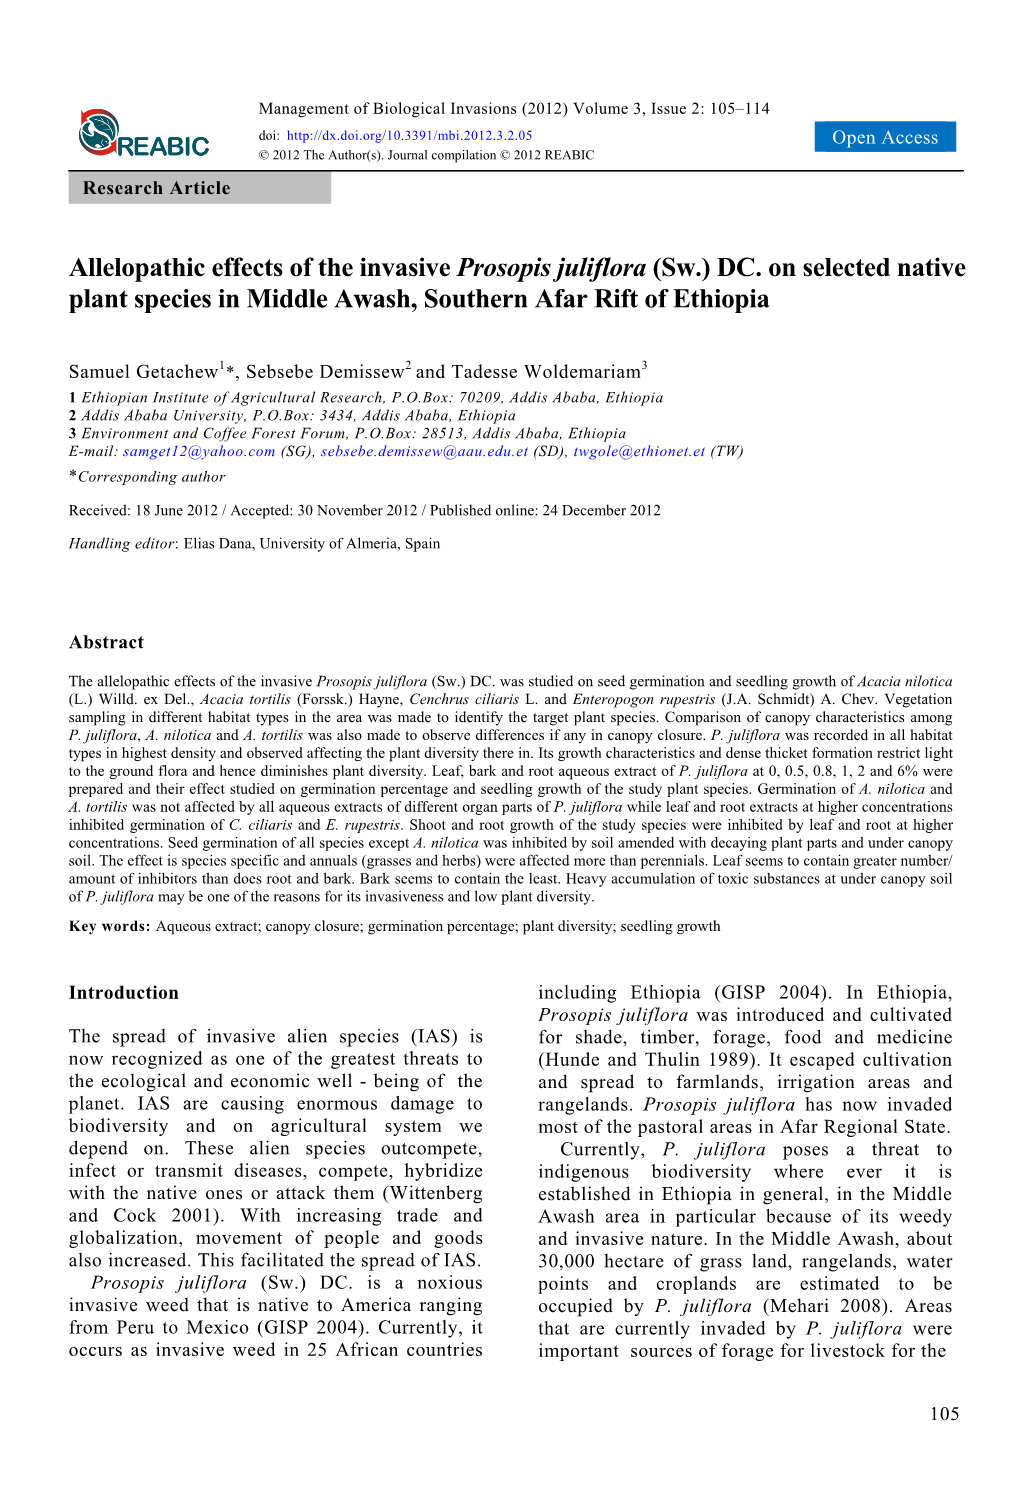 Allelopathic Effects of the Invasive Prosopis Juliflora (Sw.) DC